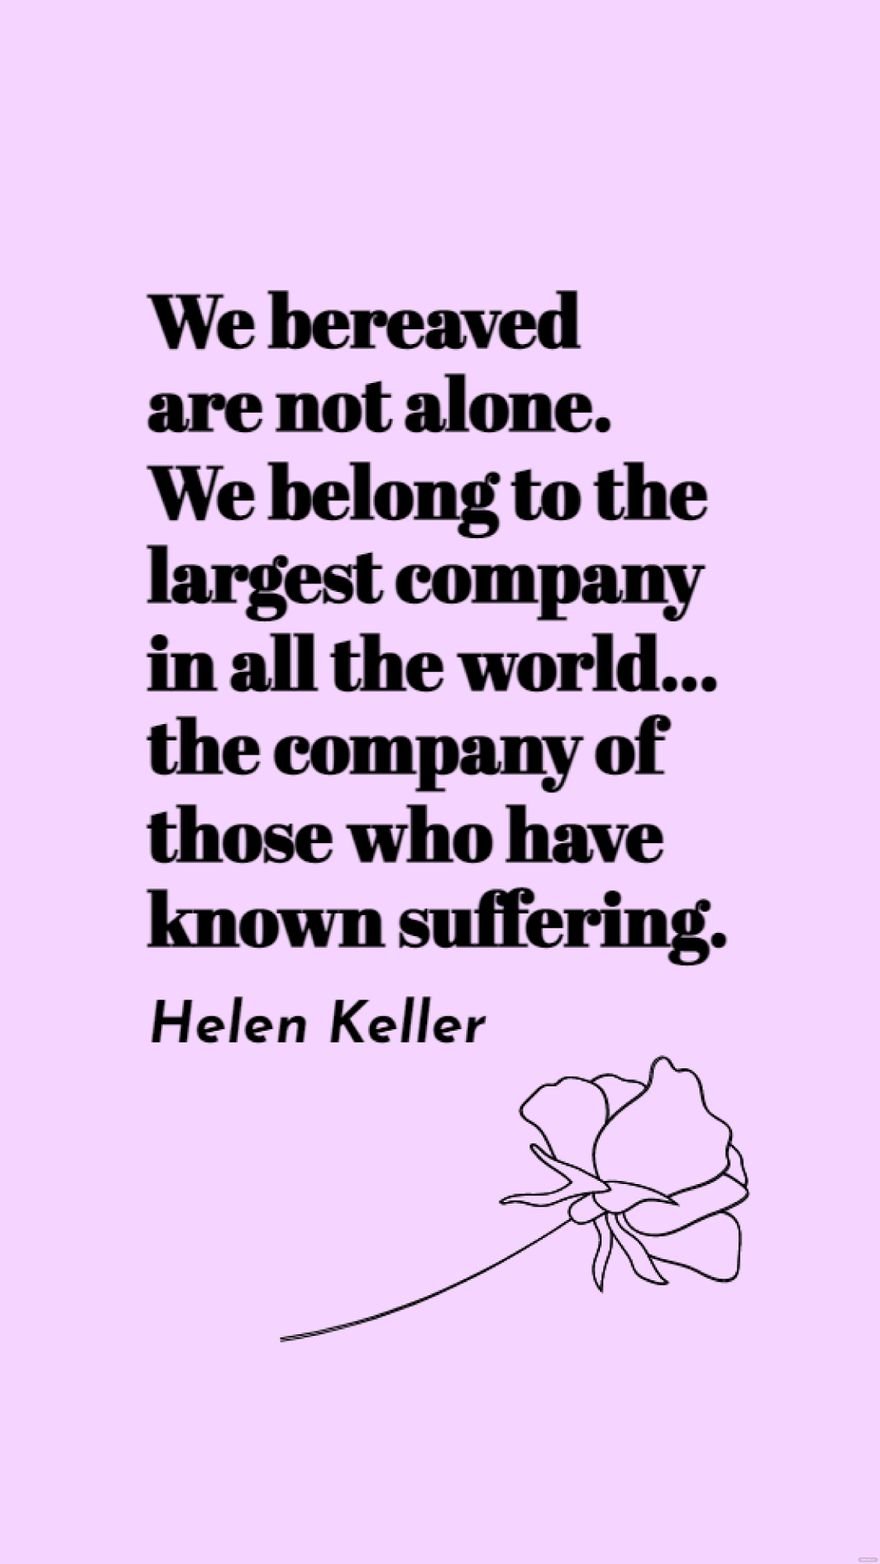 Helen Keller - We bereaved are not alone. We belong to the largest company in all the world… the company of those who have known suffering.